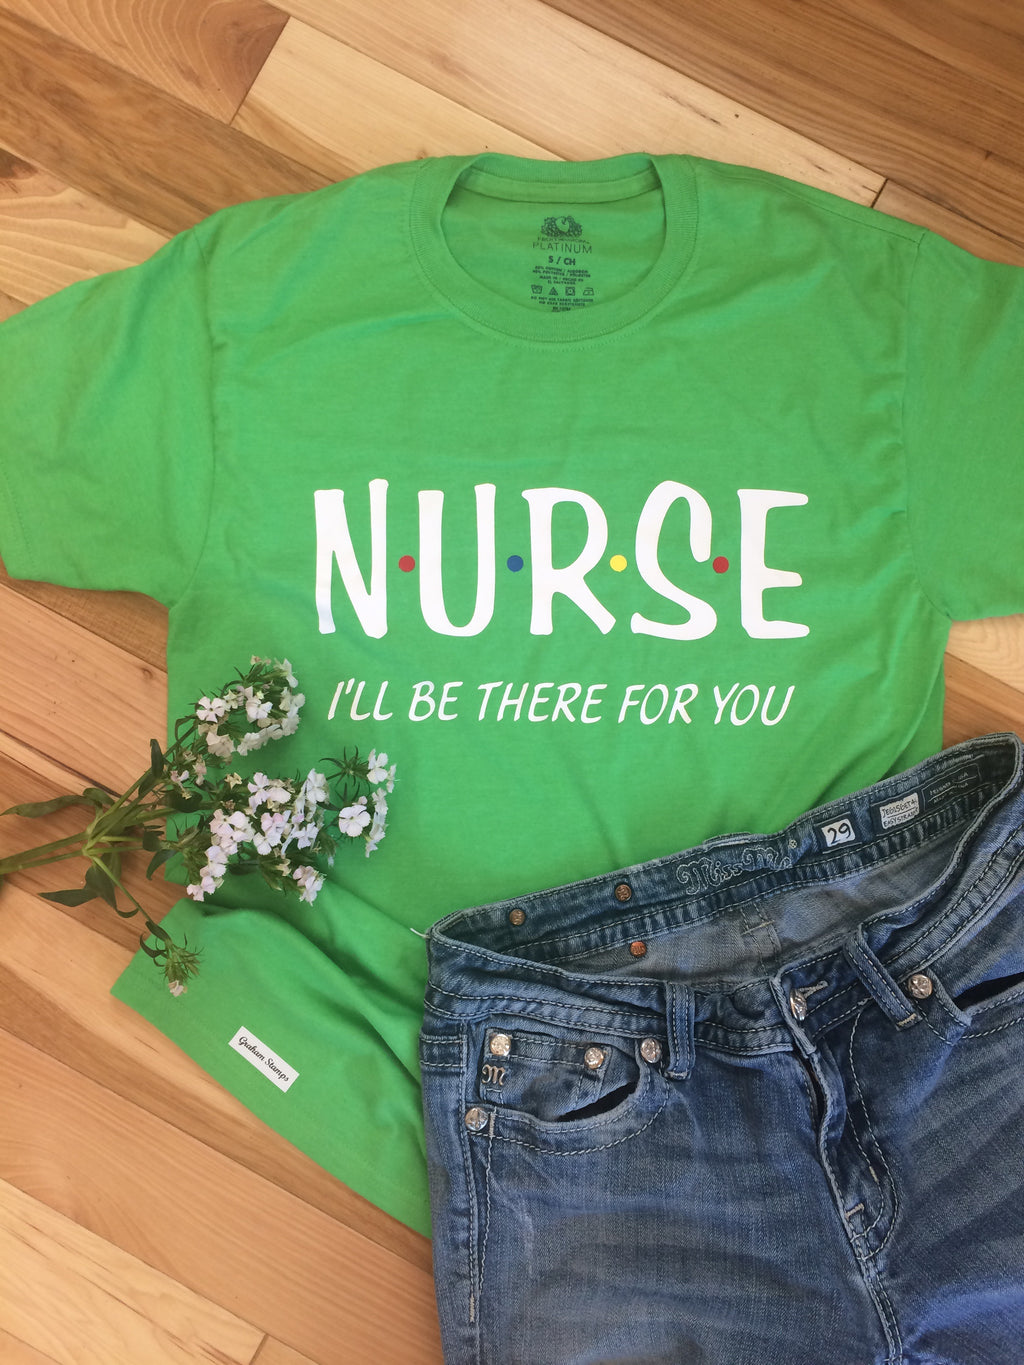 Nurse I’ll be there for you T-shirt any color